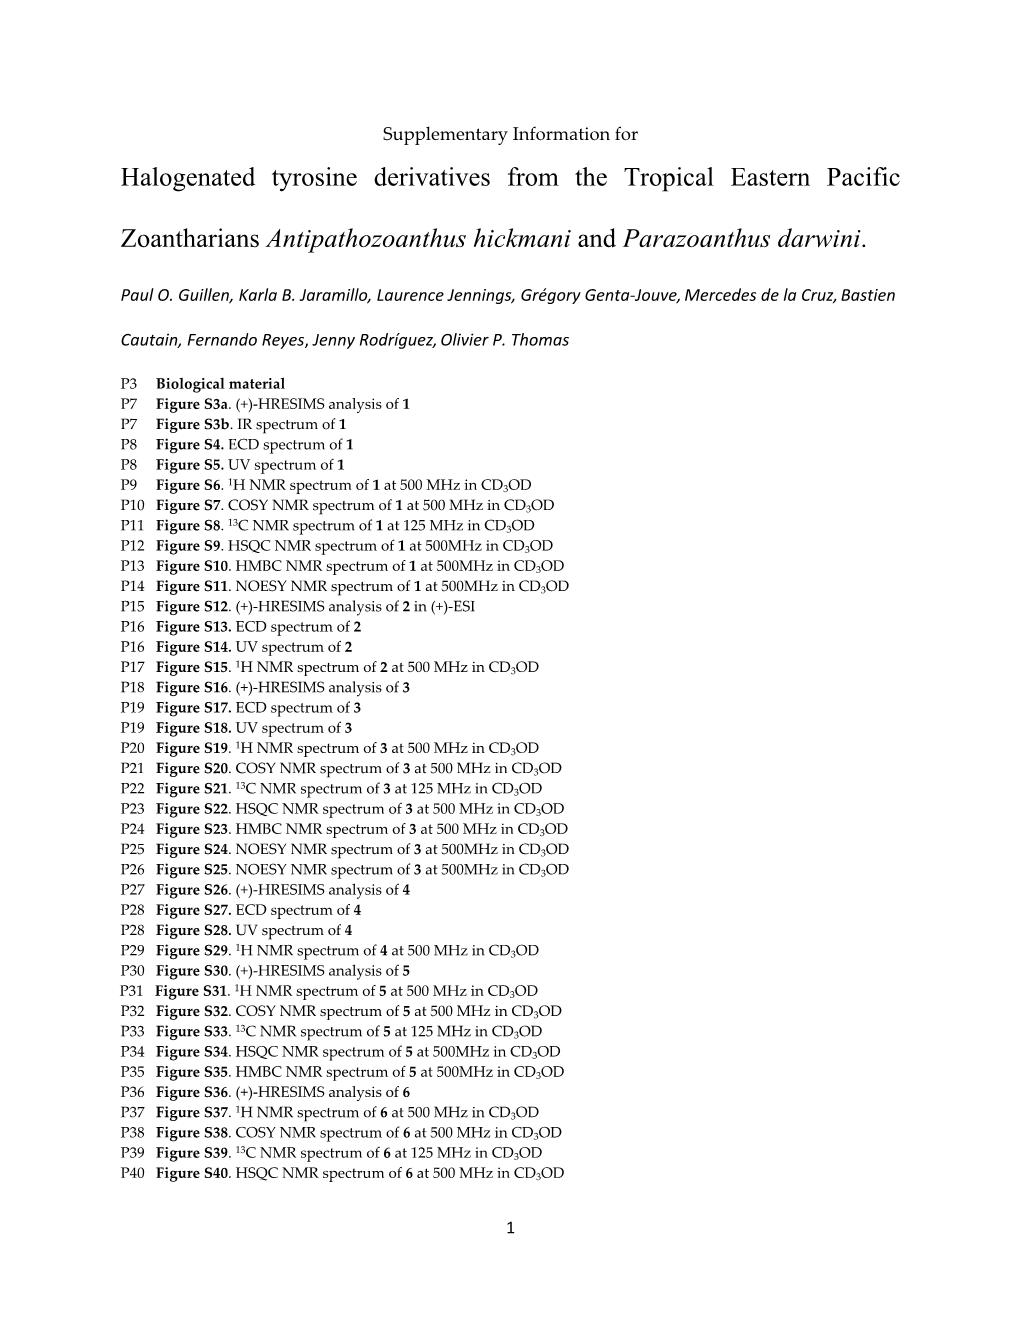 Halogenated Tyrosine Derivatives from the Tropical Eastern Pacific